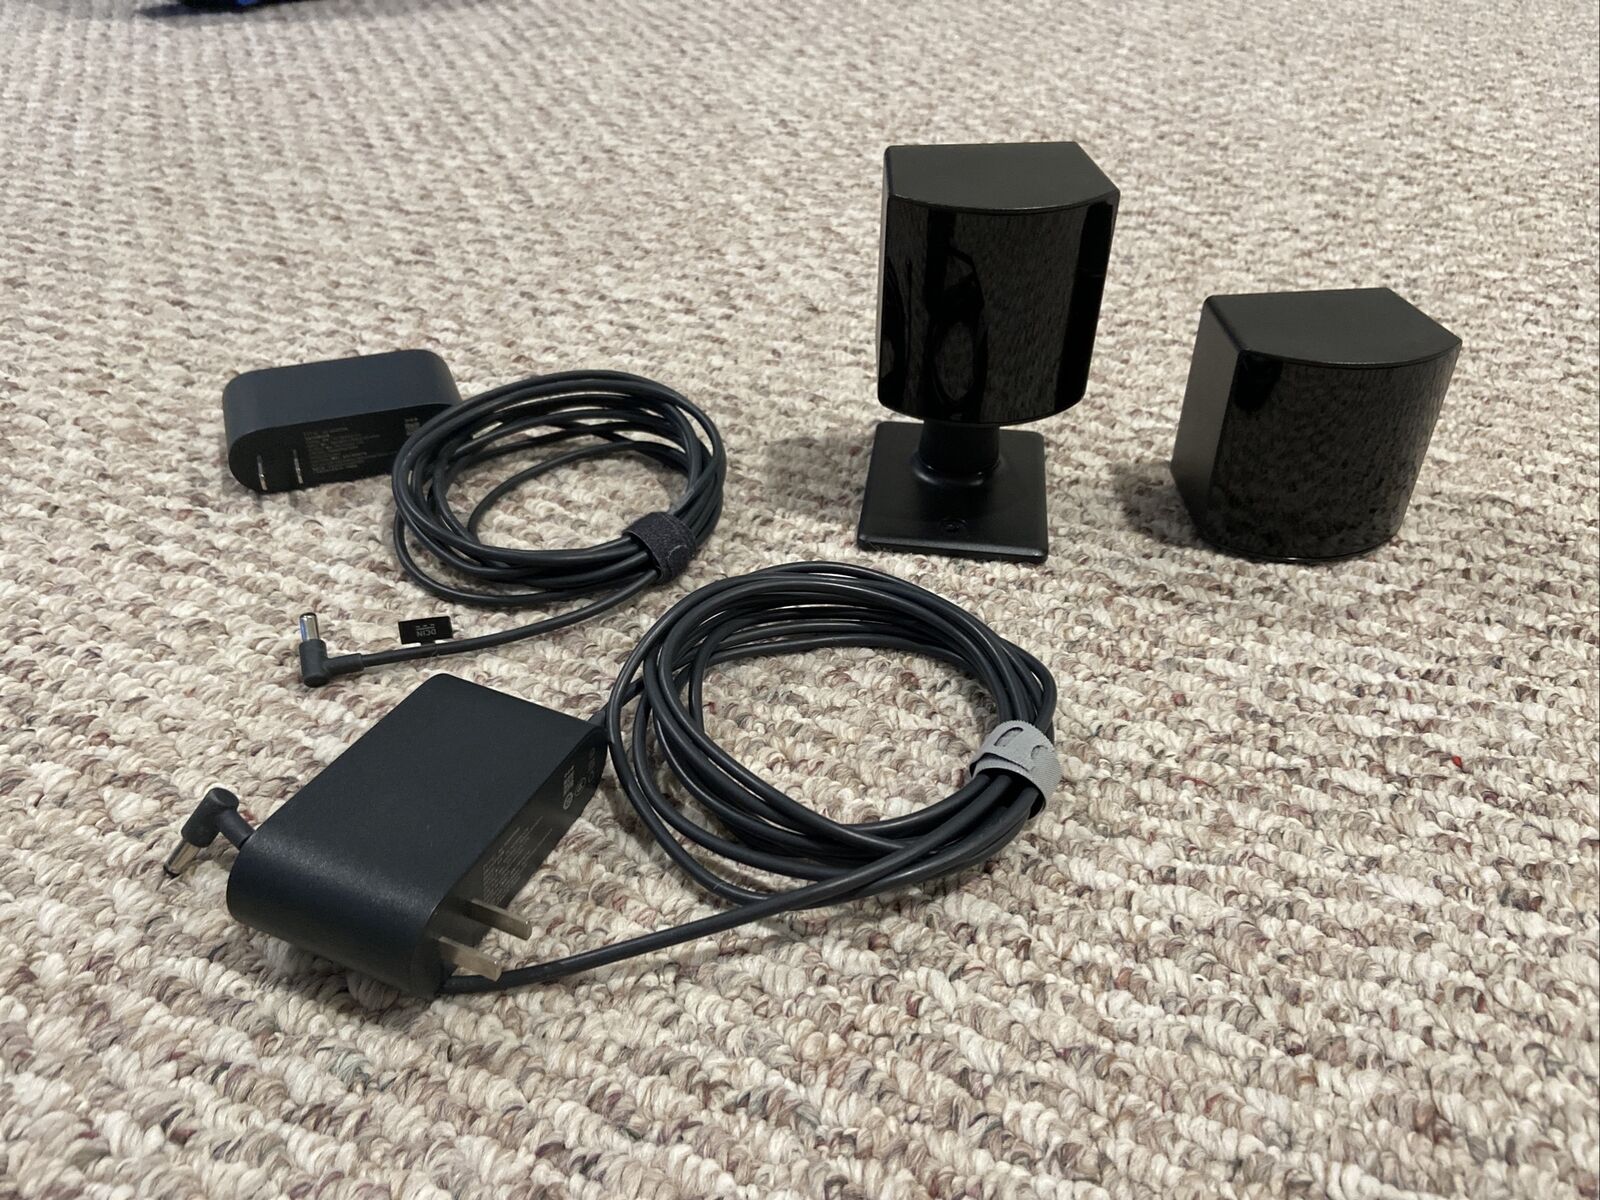 Steamvr Base Station 2.0 (pair)